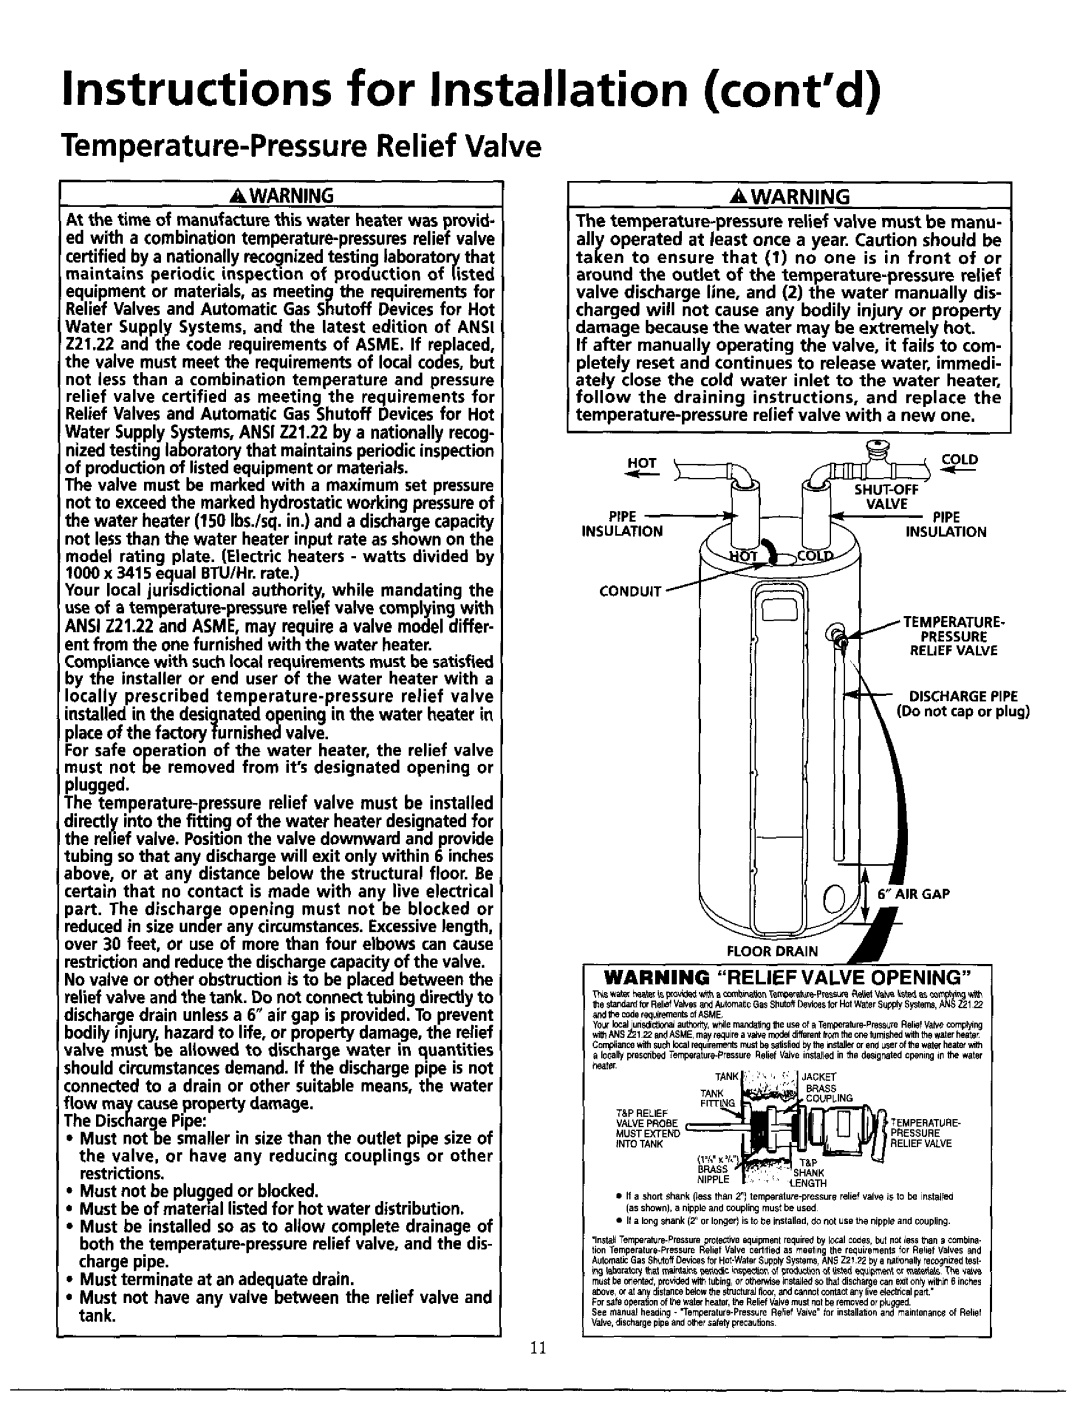 Maytag HE31240S tank, Instructions for Installation contd, Temperature-PressureRelief Valve, to life, or property damage 